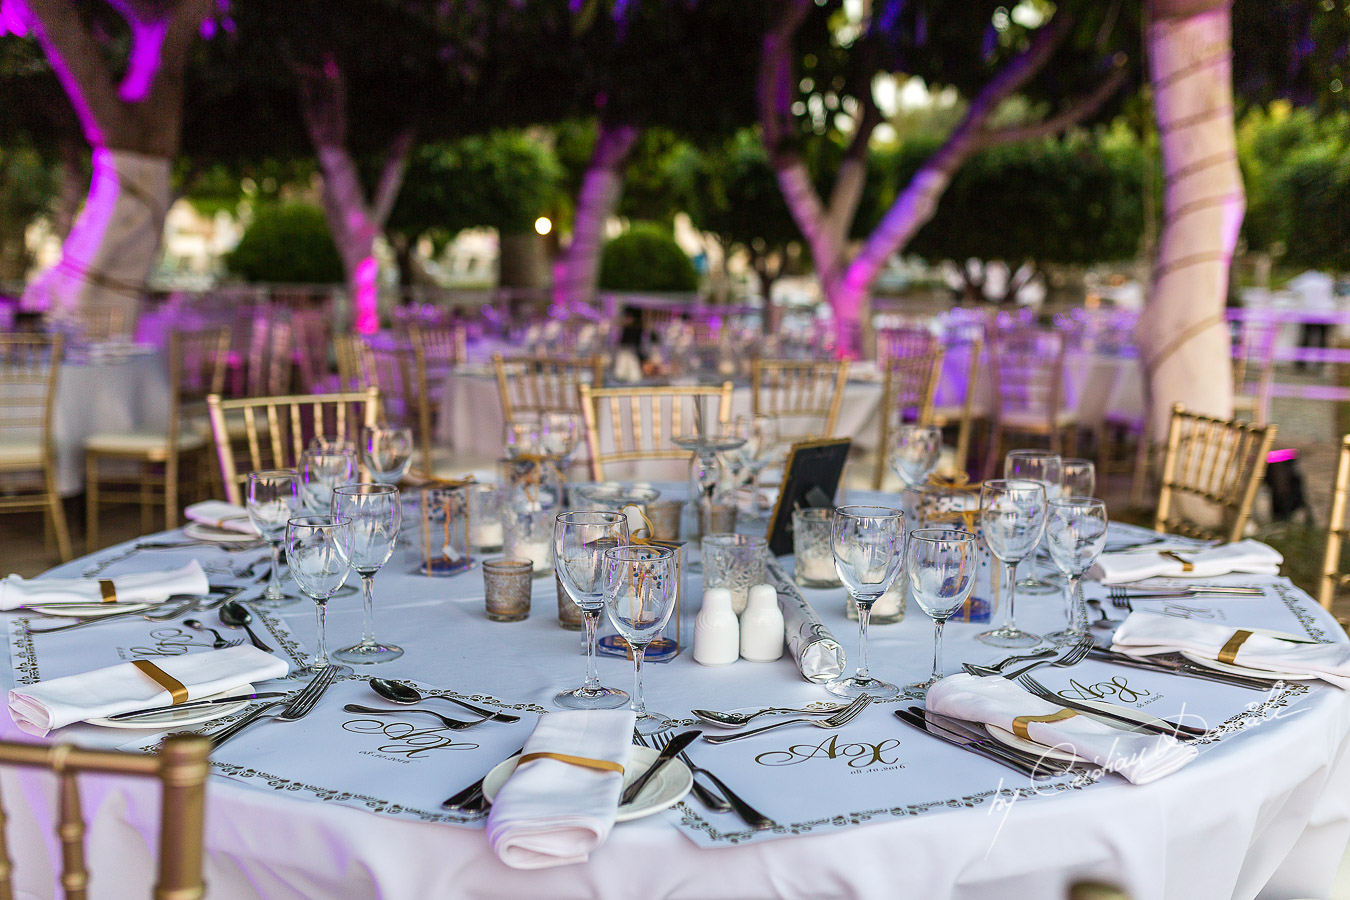 Lovely wedding details captured at an elegant and romantic wedding at Elias Beach Hotel by Cristian Dascalu.